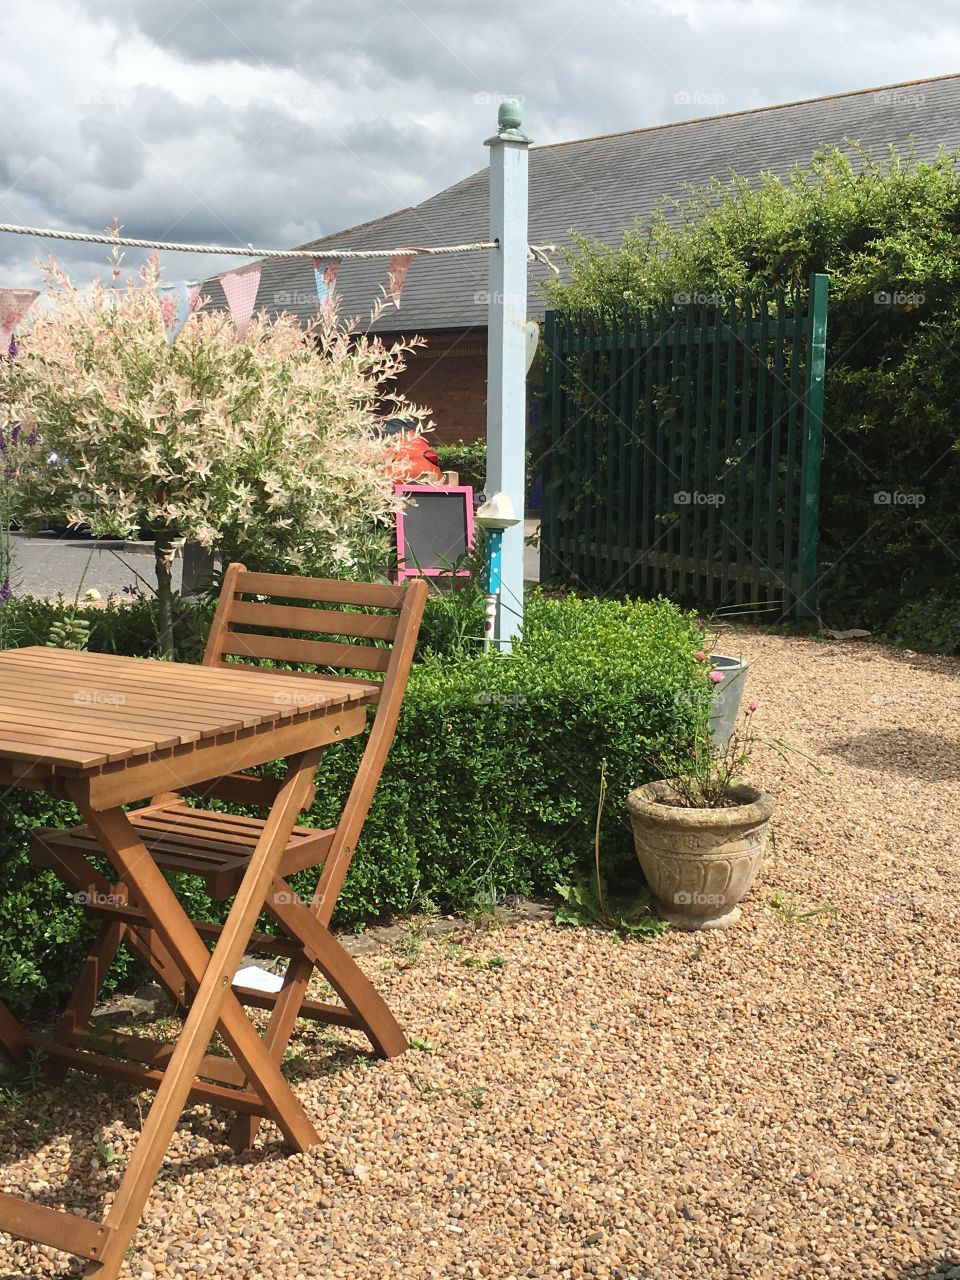 Tea garden landscape featuring table and chair against a pink flamingo Salix tree and bunting